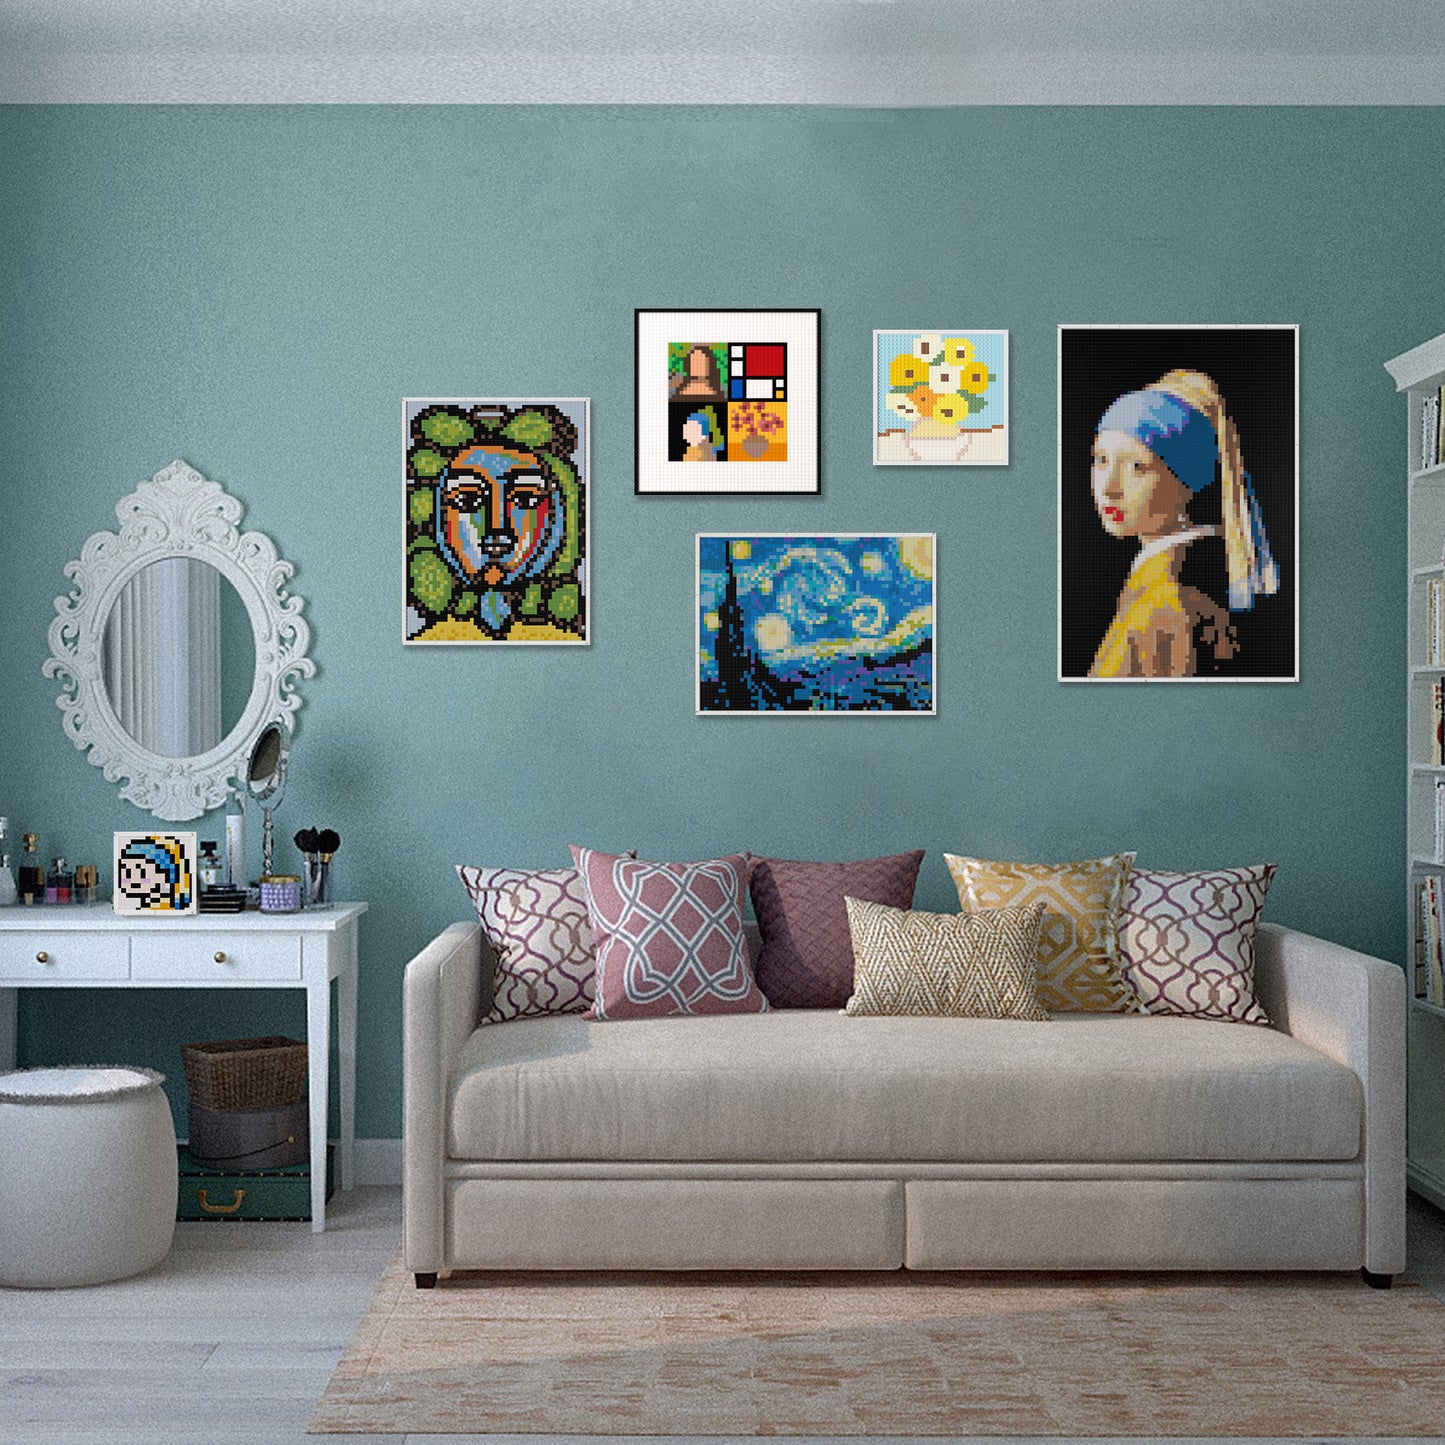 Four Famous Paintings Gathering! Mona Lisa's Smile・Van Gogh's Sunflowers・Girl with a Pearl Earring・Mondrian, Lego Compatible Pixel Art Jigsaw Puzzle